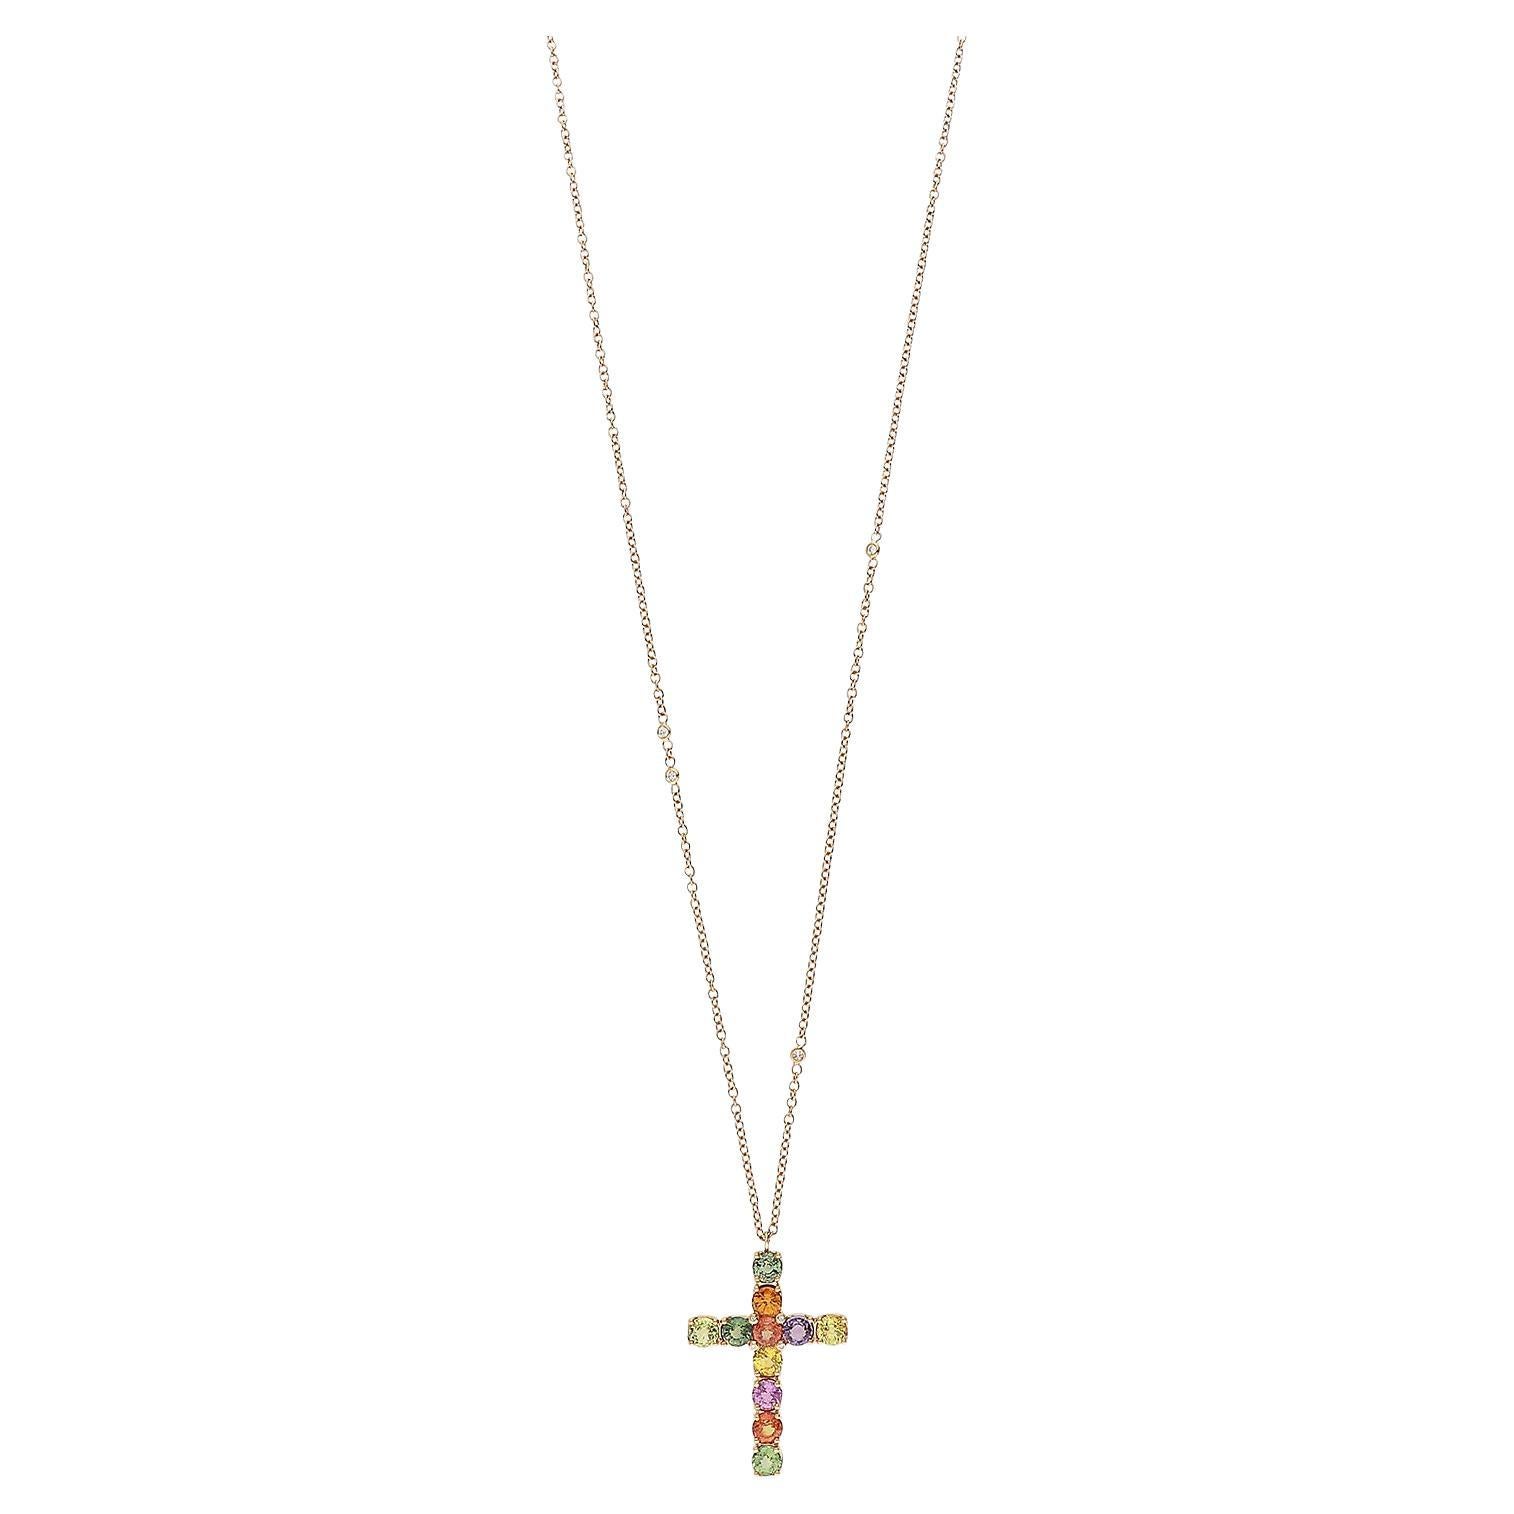 Pendant necklace with 18kt rose gold cross pendant